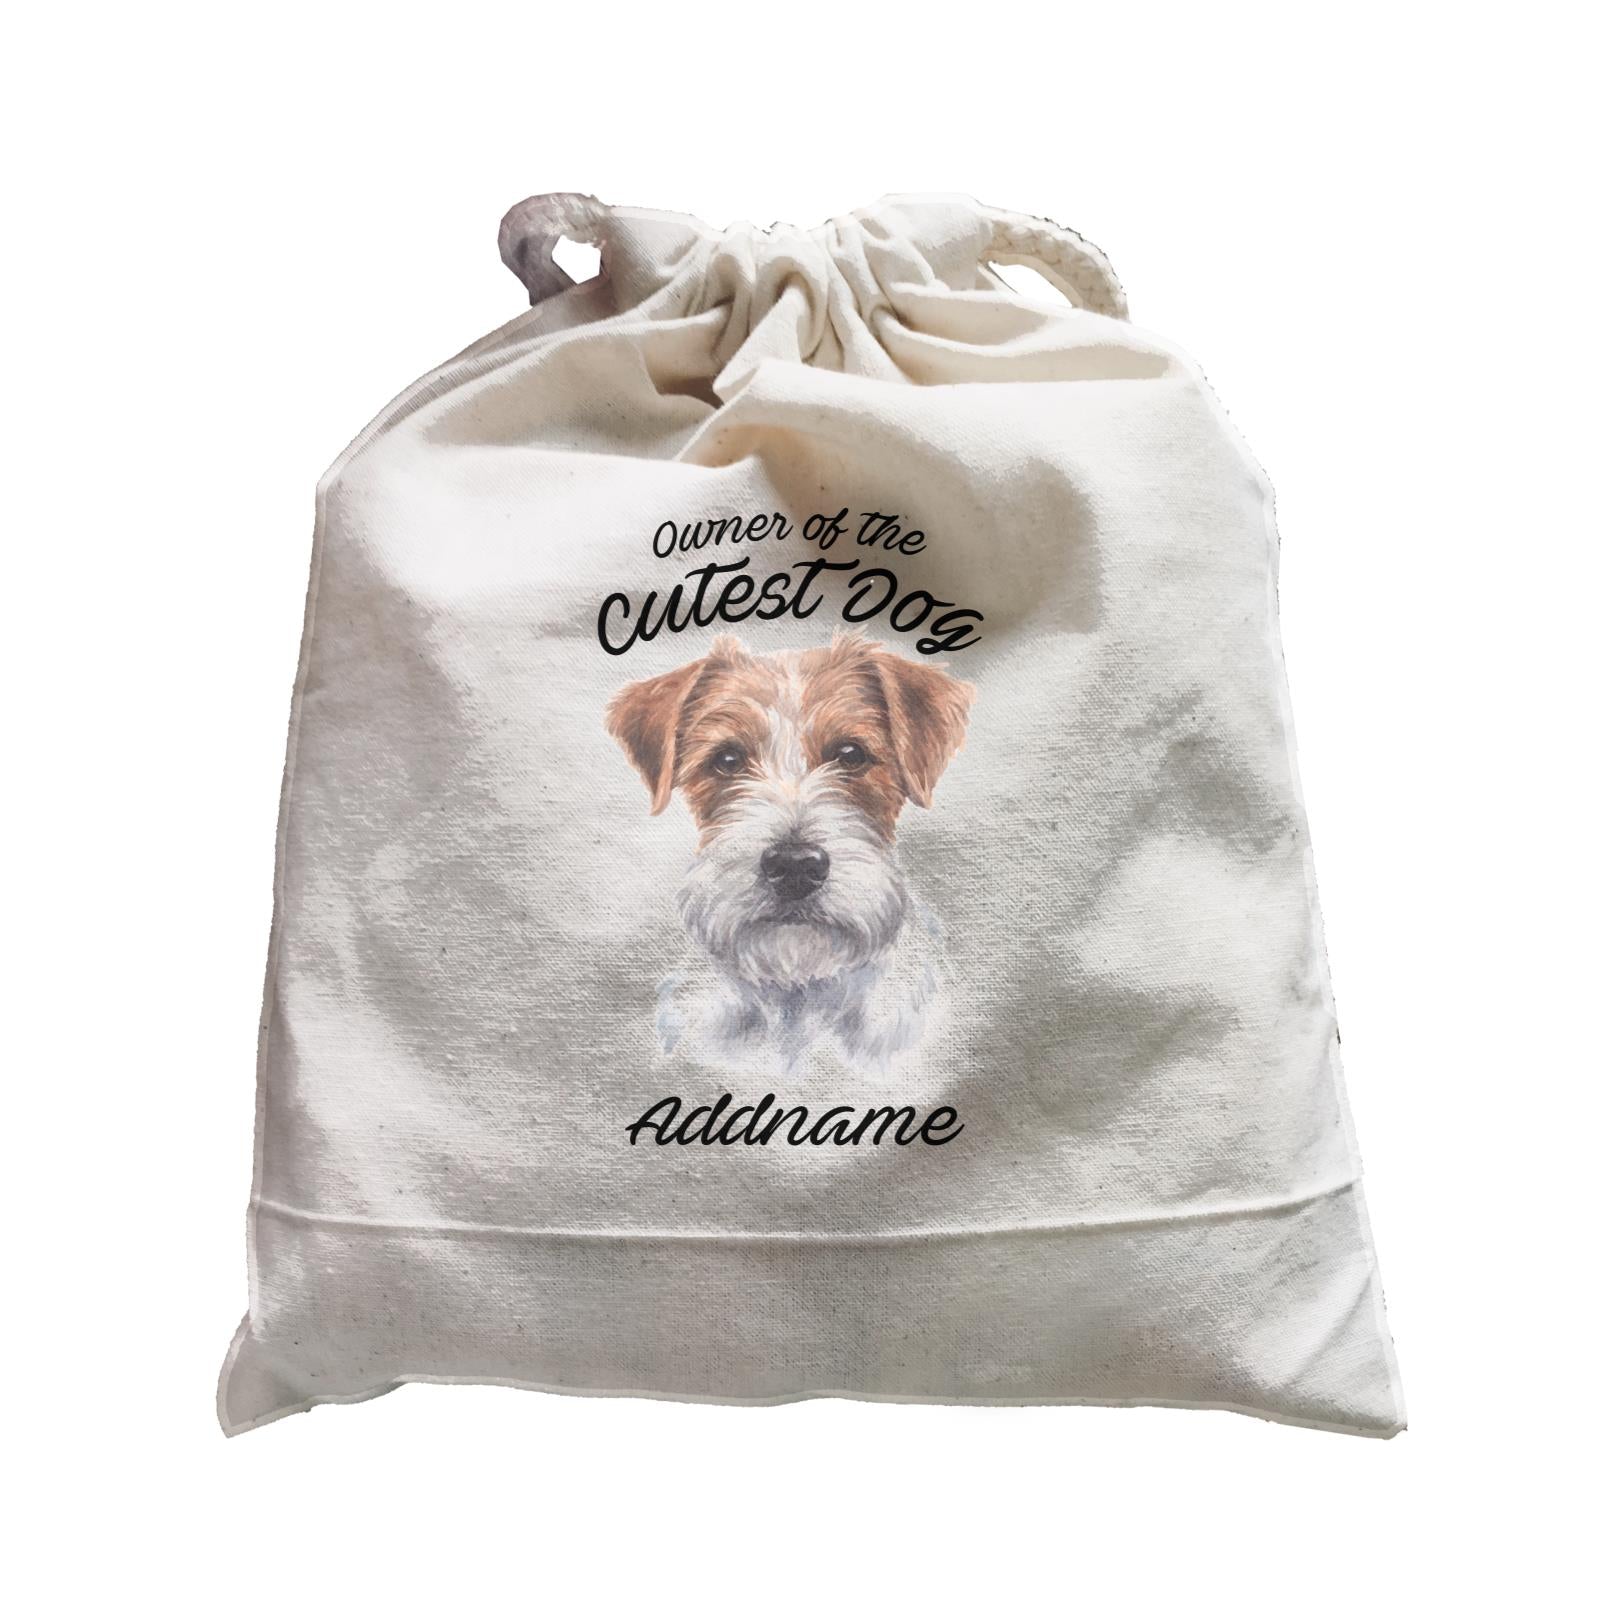 Watercolor Dog Owner Of The Cutest Dog Jack Russell Long Hair Addname Satchel